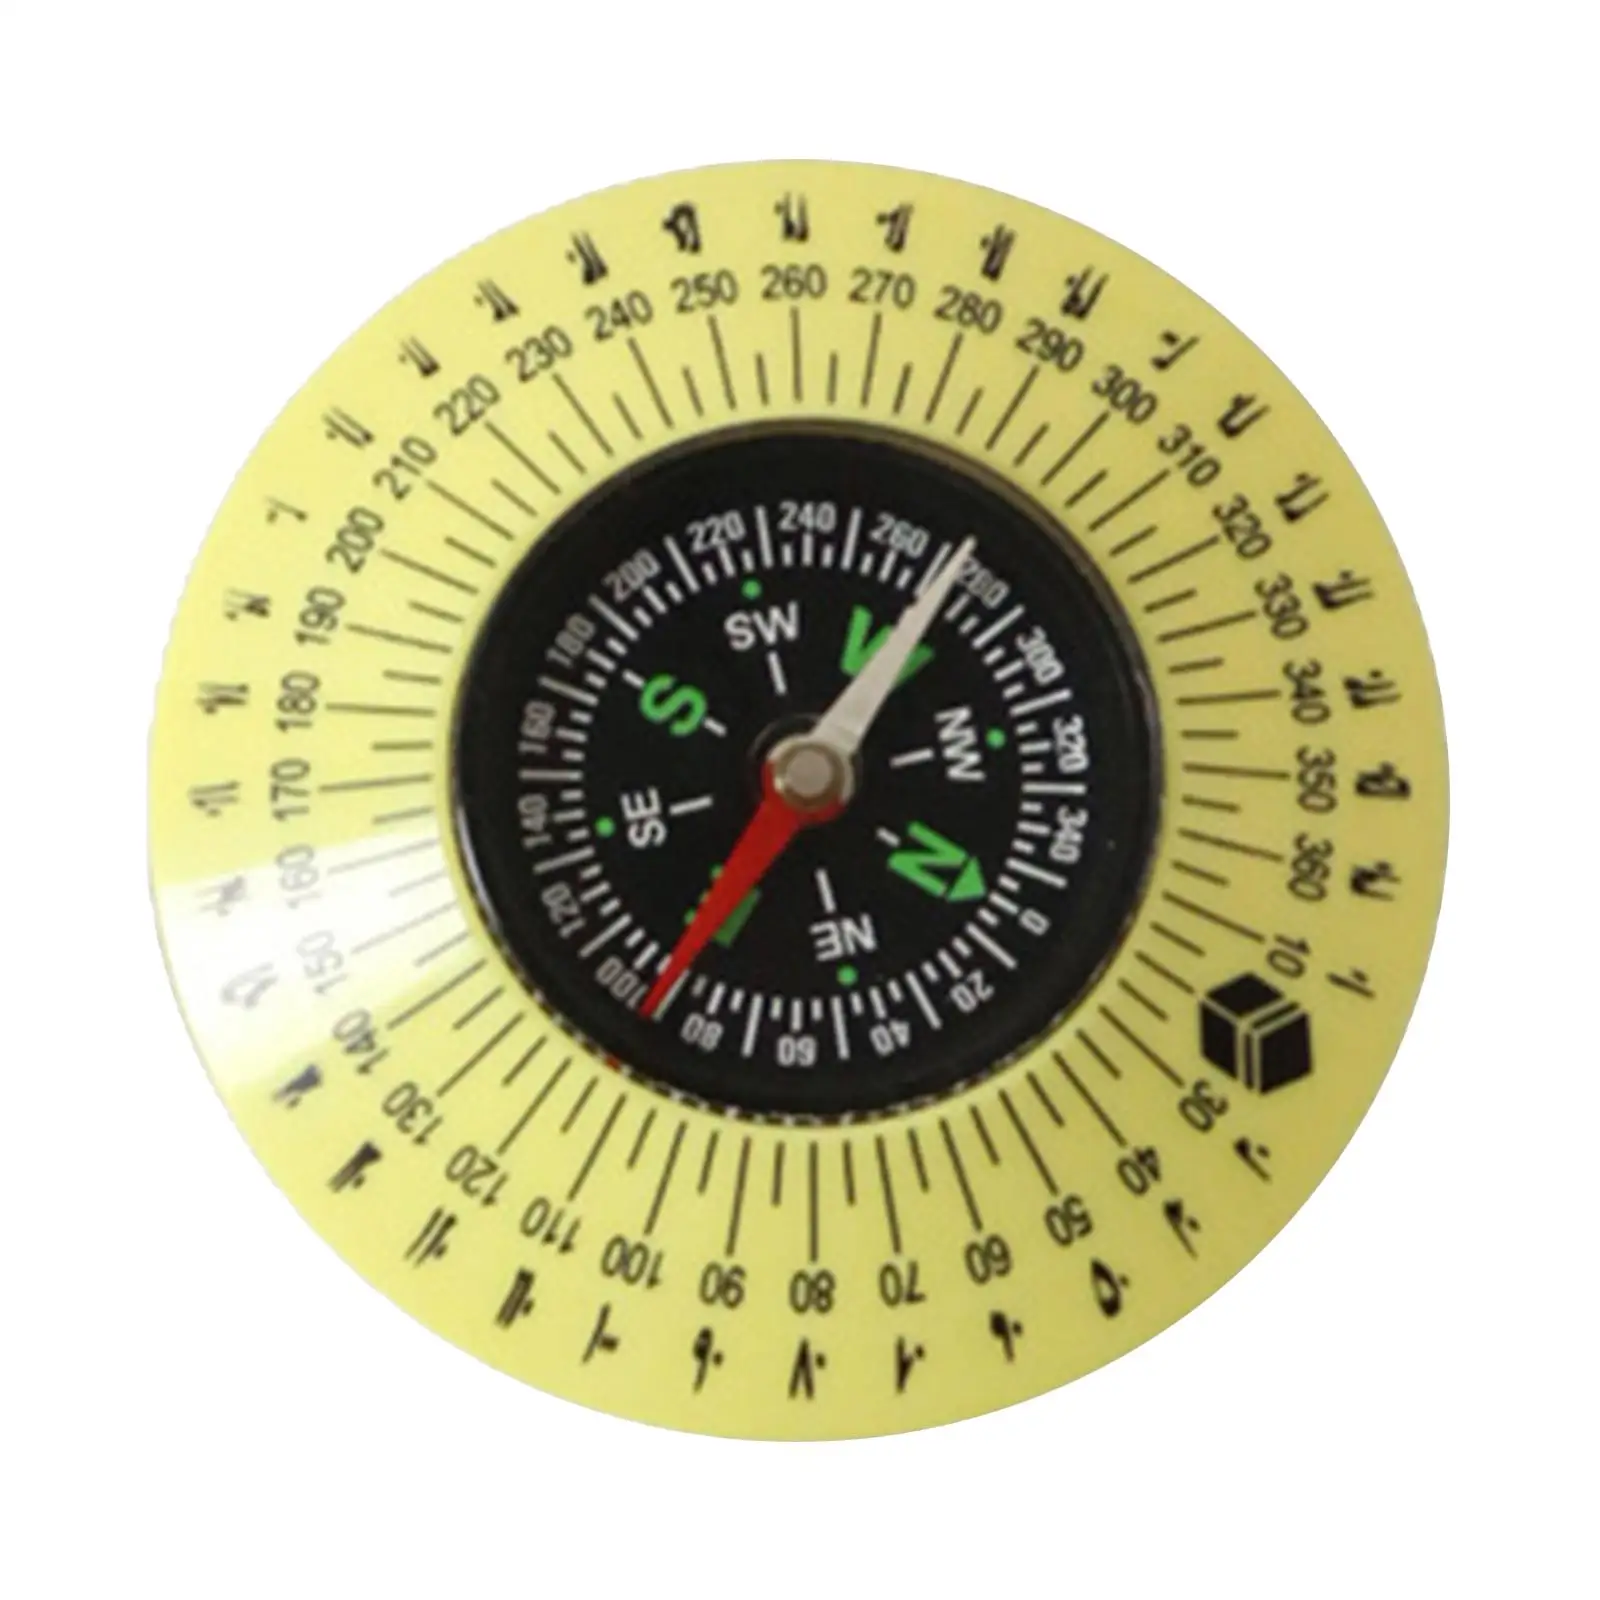 Qibla Find Compass Pocket Portable Mecca Kaaba Small Makkah Qibla Direction Compass for Hiking Outdoor Backpacking Gadget Gift